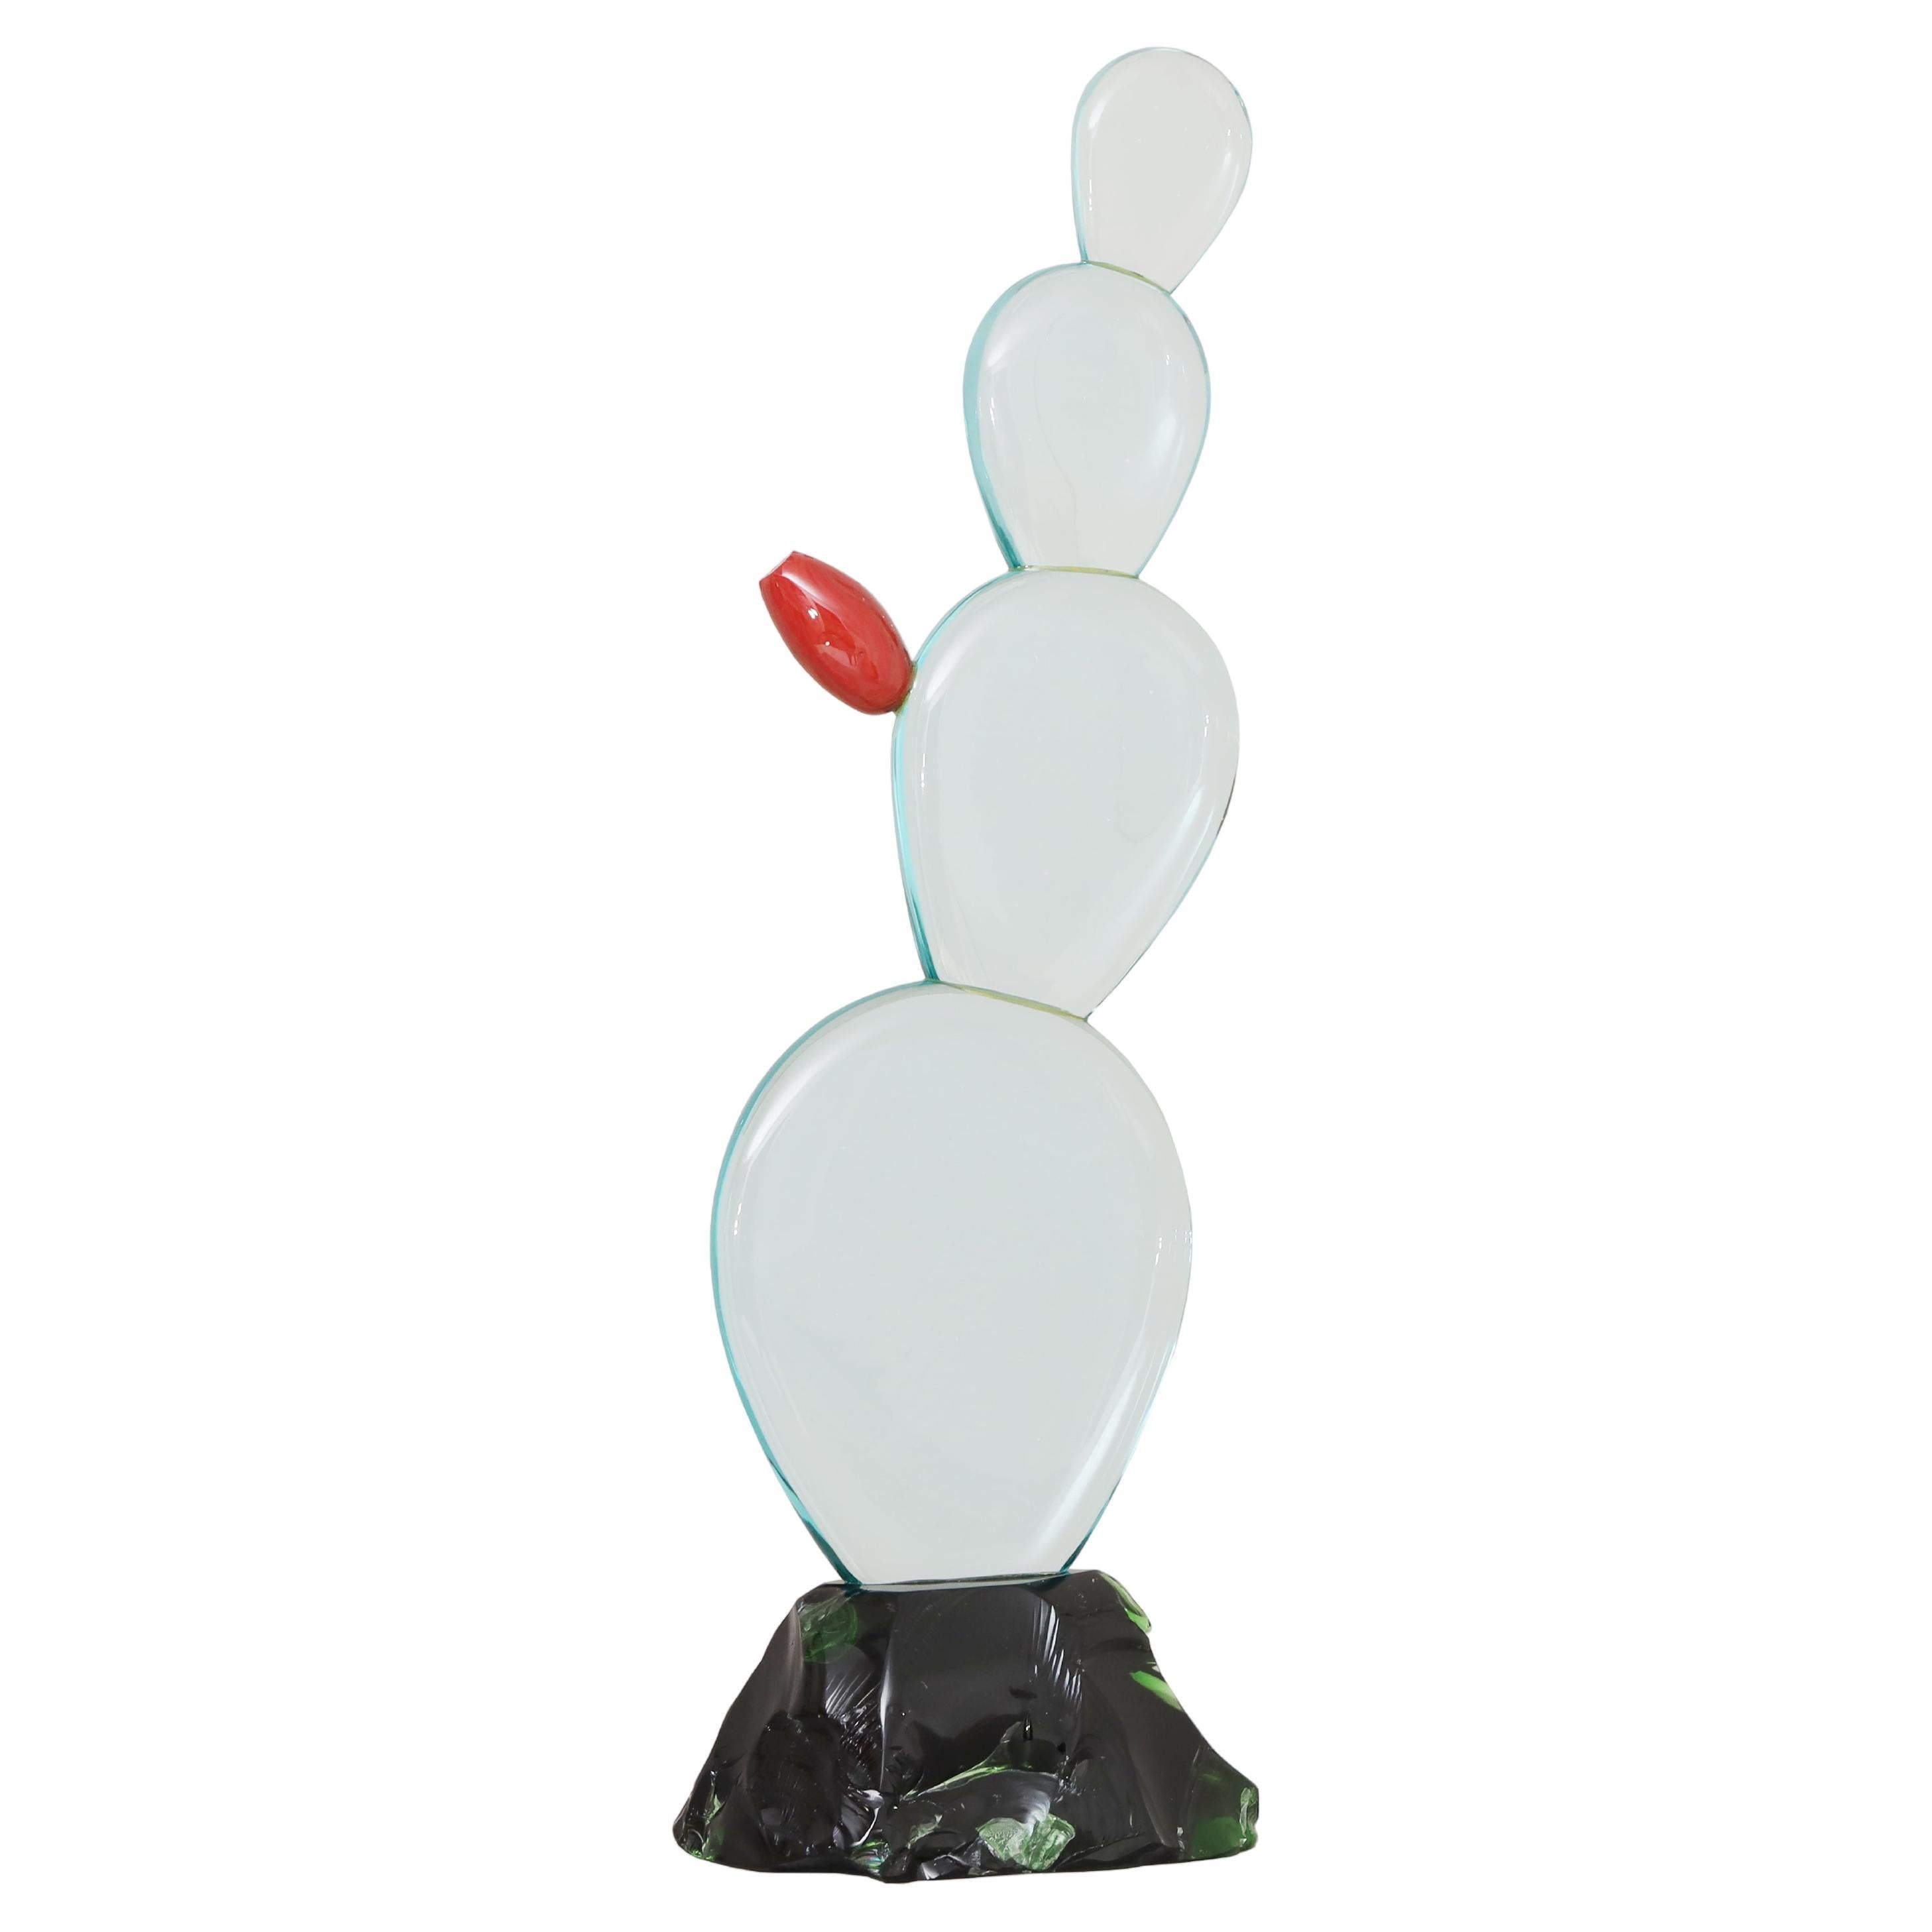 Abstract Italian Art Glass Sculpture For Sale